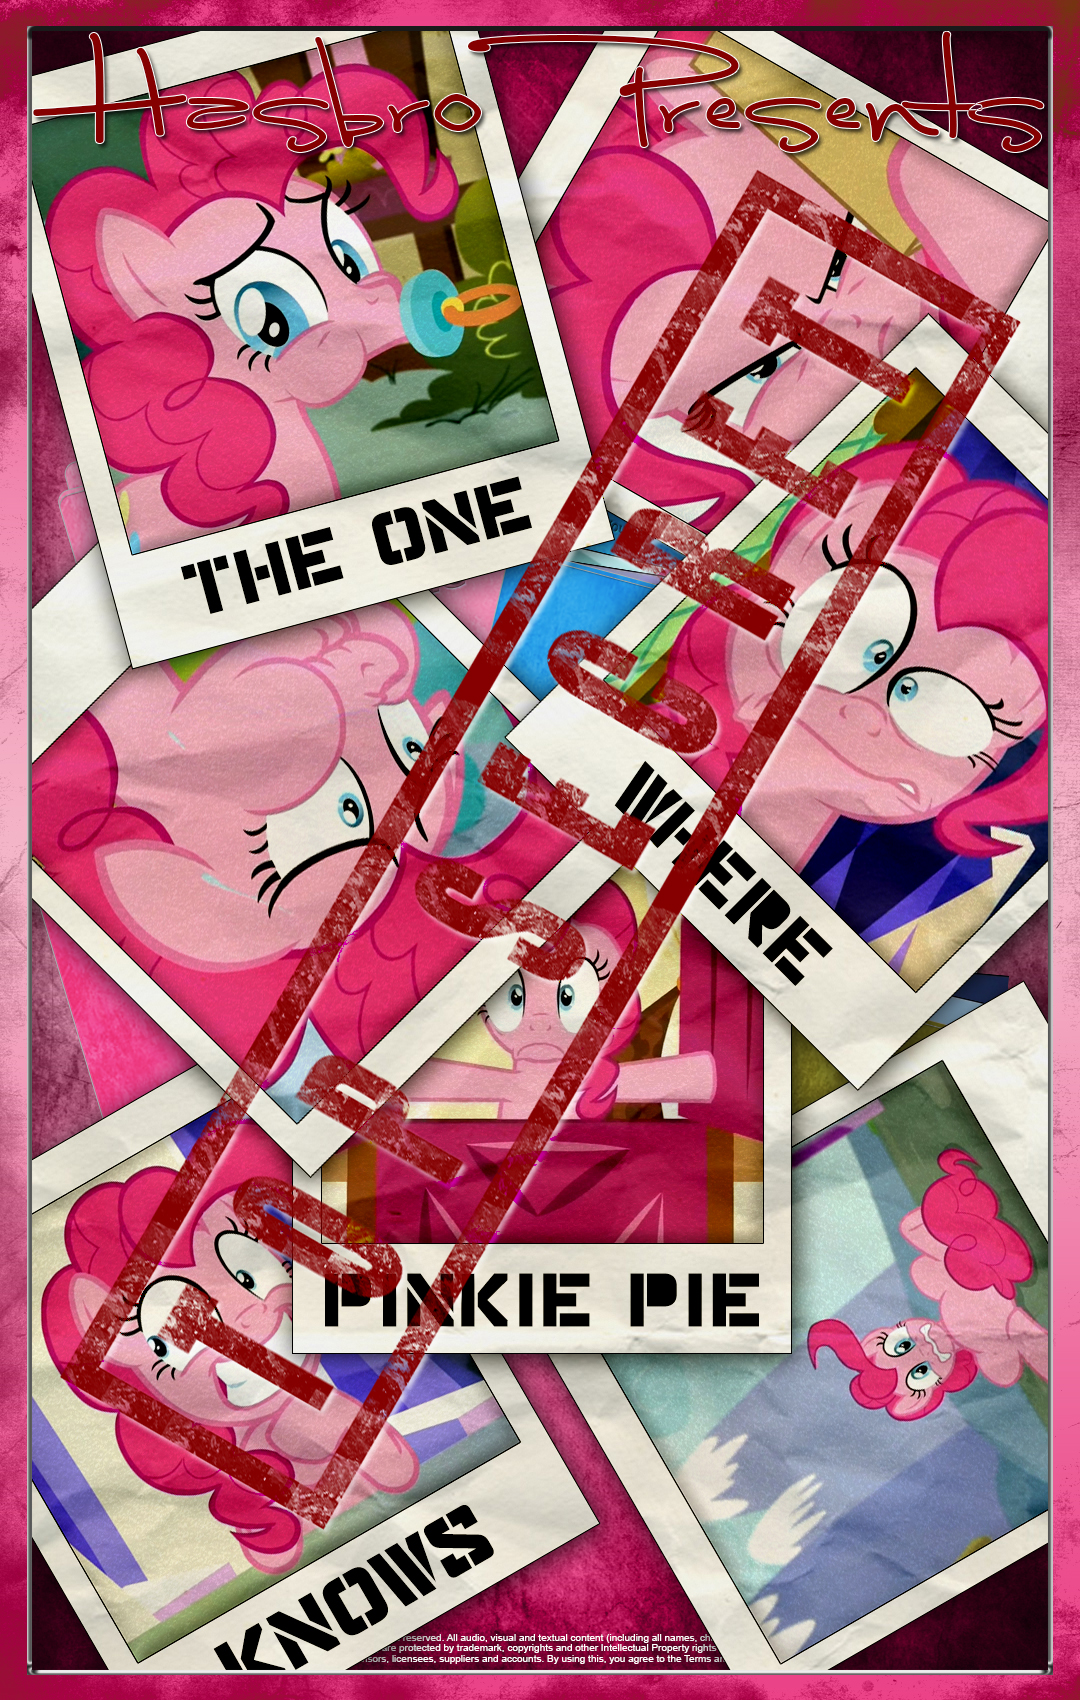 mlp___the_one_where_pinkie_pie_knows_movie_poster_by_pims1978-d9djwkw.jpg